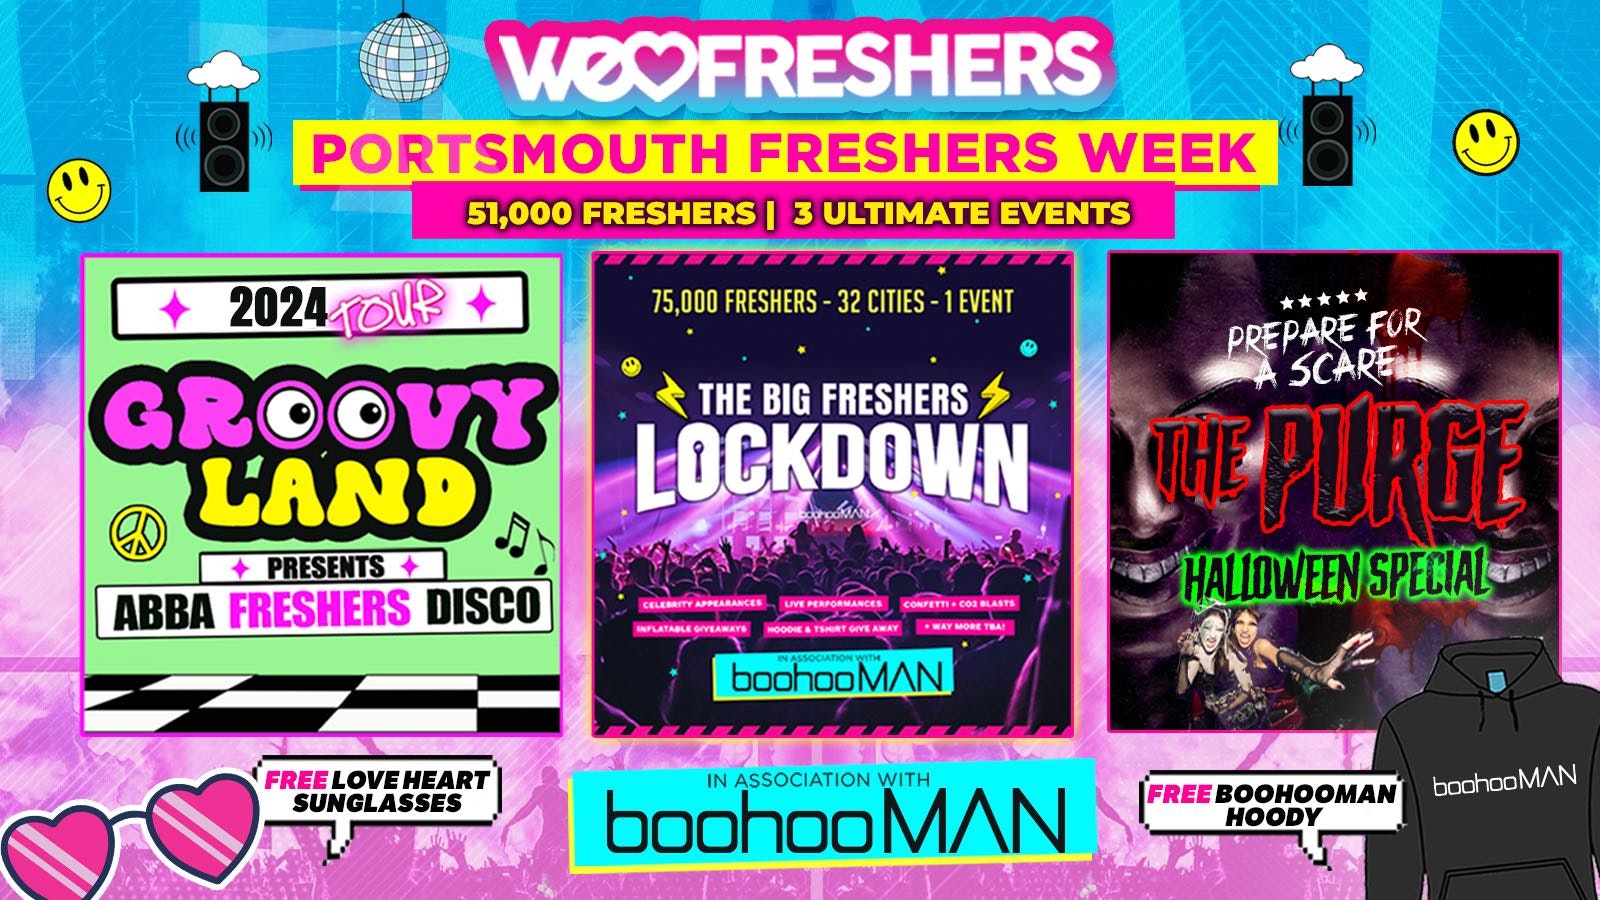 WE LOVE PORTSMOUTH FRESHERS 2024 in association with boohooMAN – 3 EVENTS❗